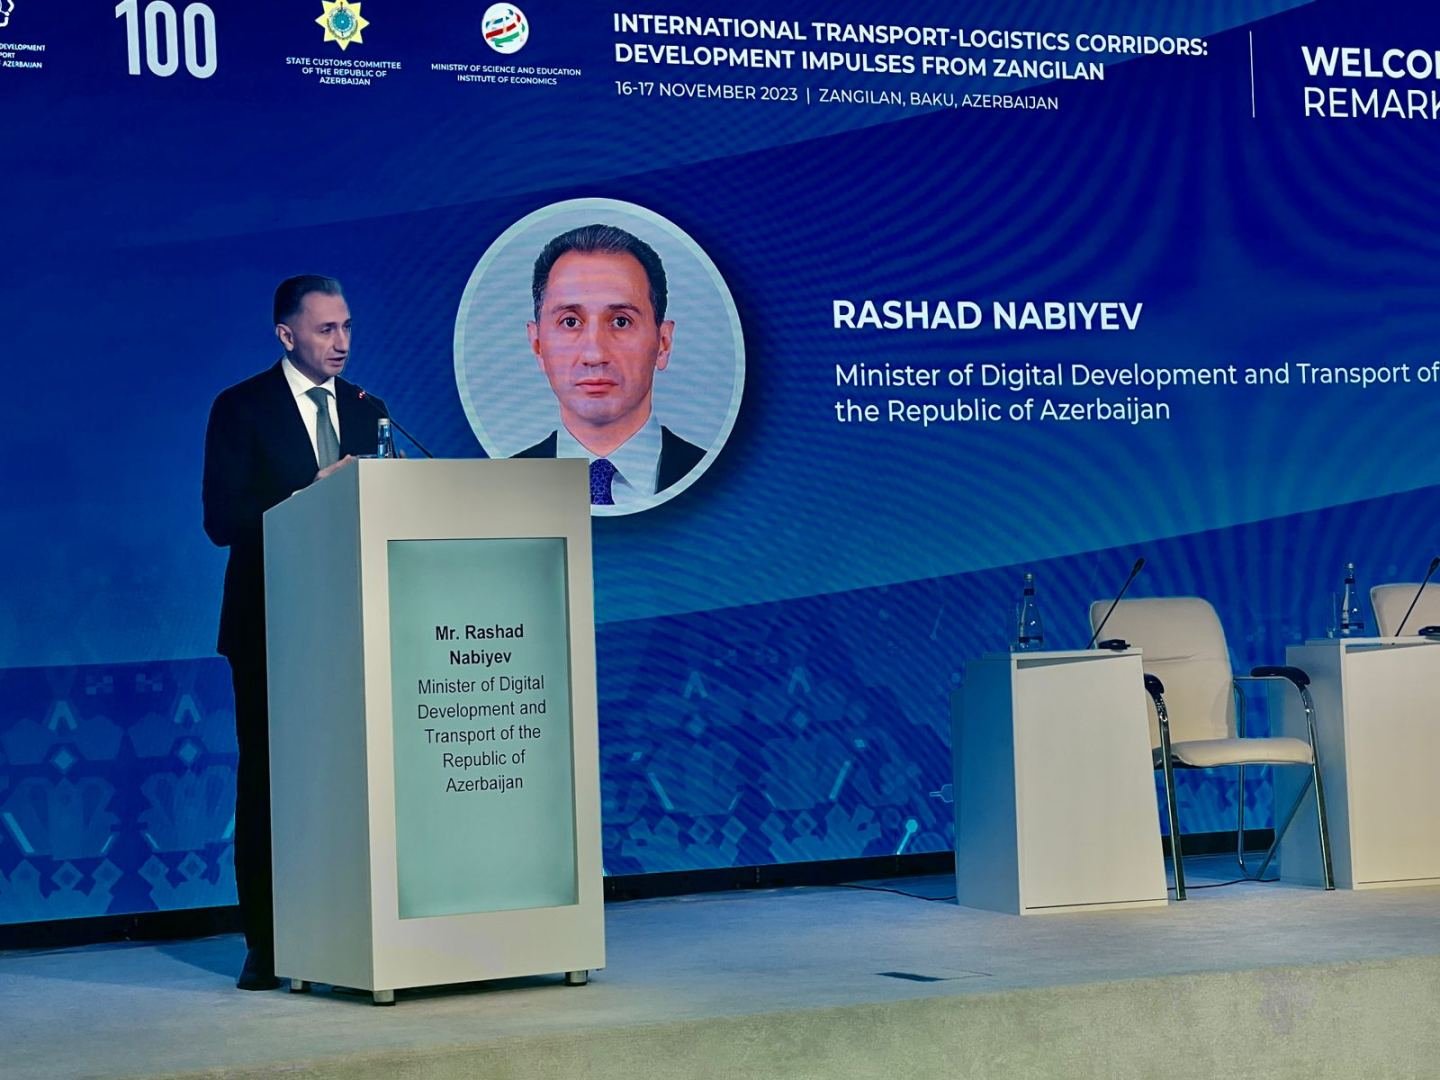 Success in Middle Corridor to bring changes in transport, logistics - Azerbaijani minister